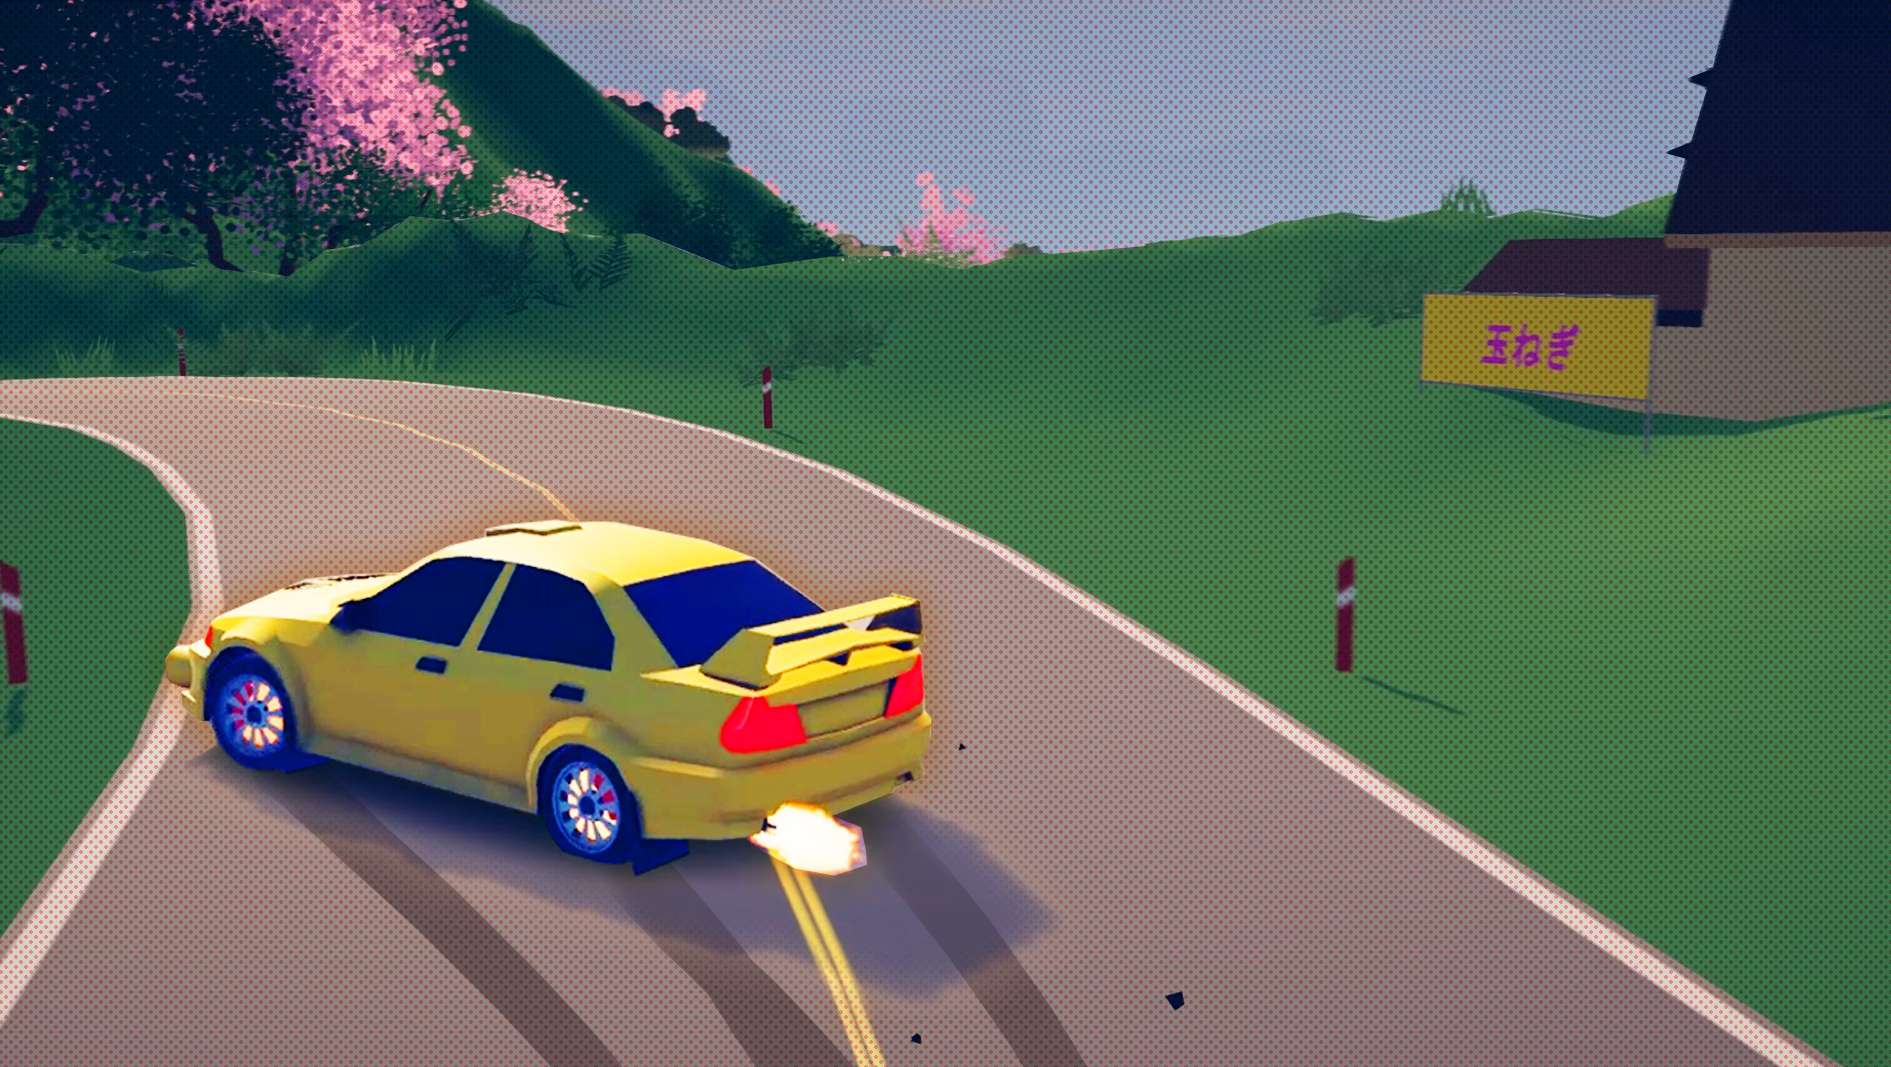 A bright yellow cars drifting from the right to the left in a low poly video game world that looks like a Japanese mountainside, complete with pink cherry blossom trees.